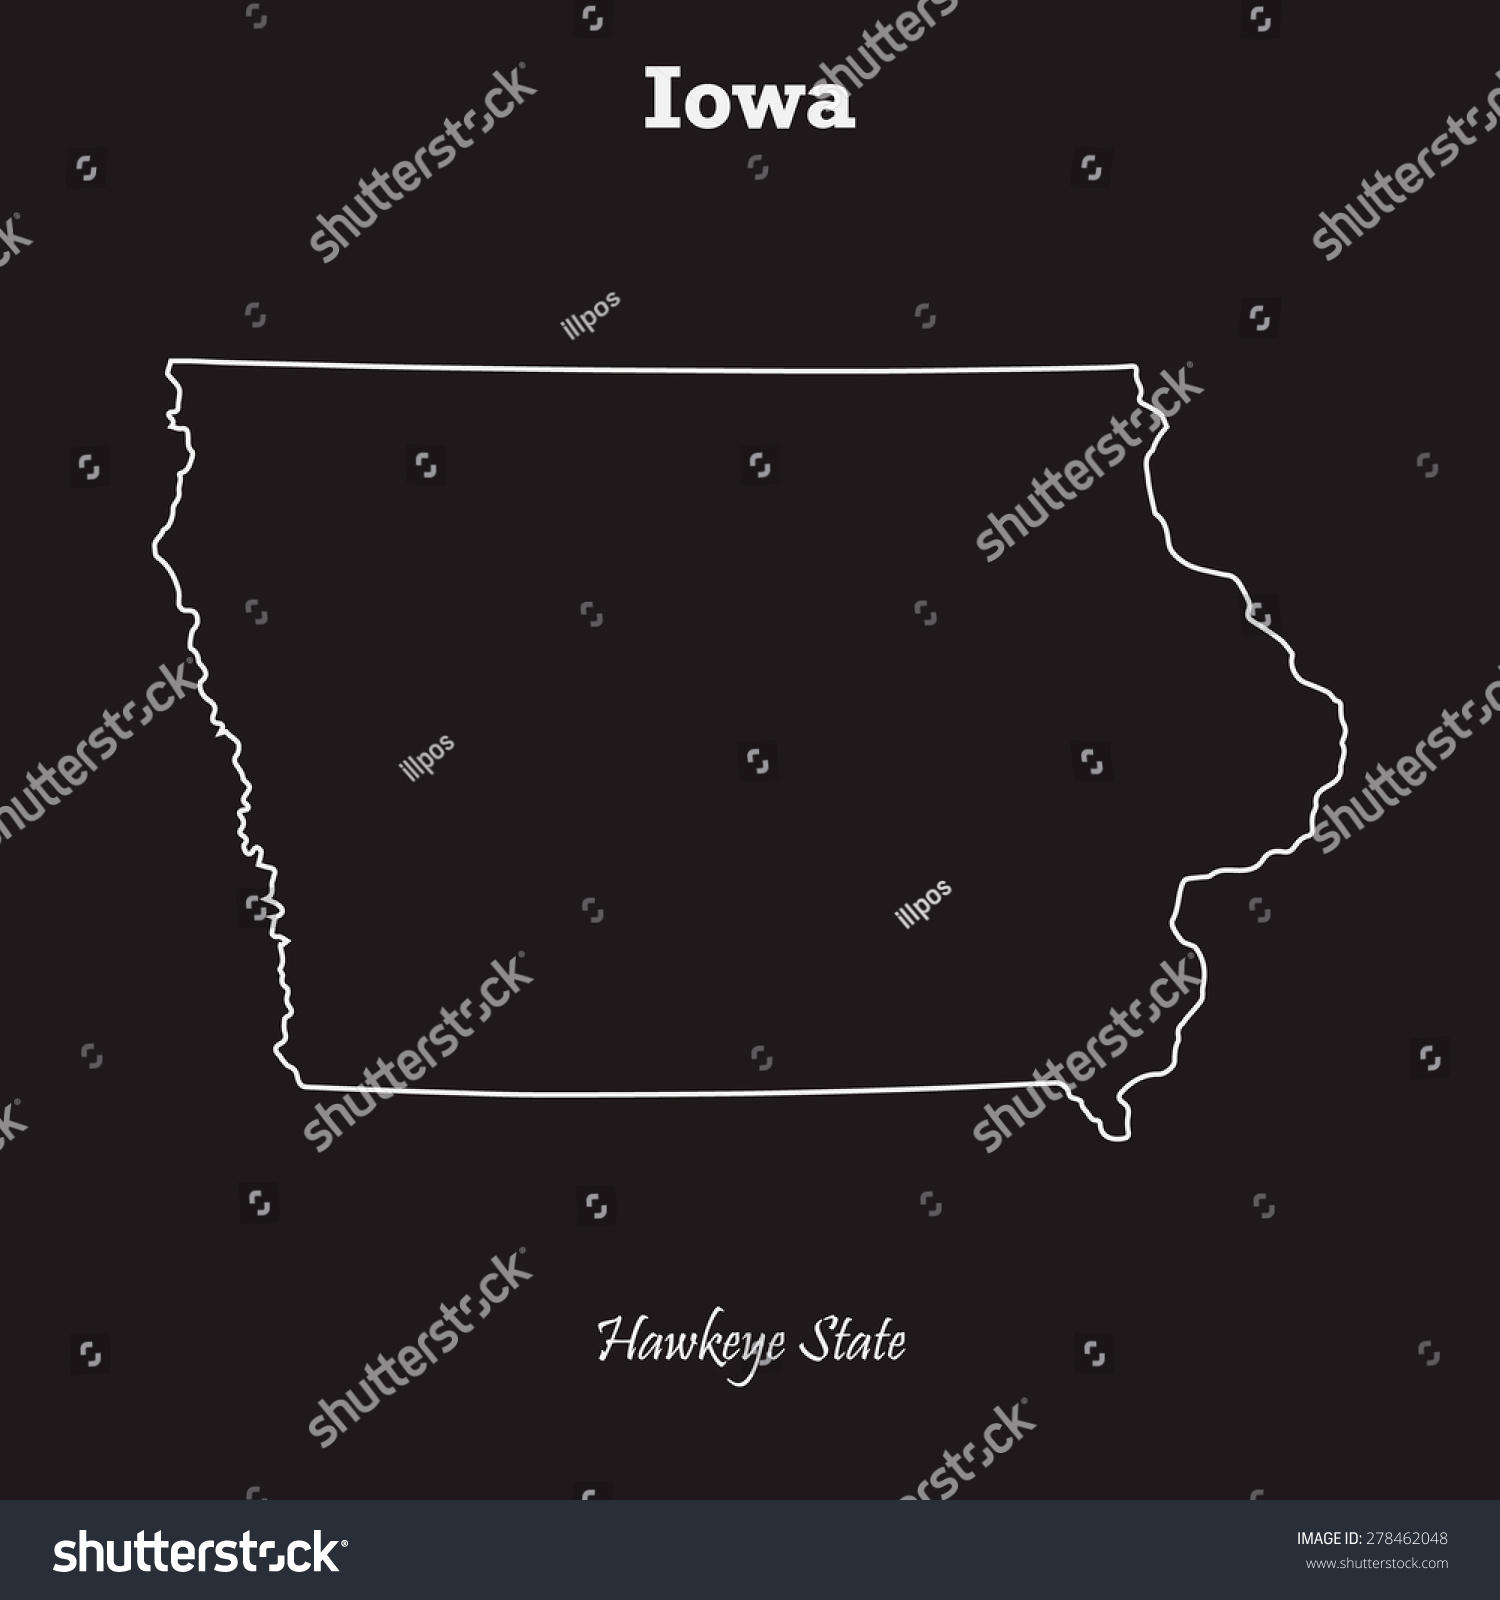 Iowa Outline Map Stroke Name Of State Line Royalty Free Stock Vector 278462048 2359